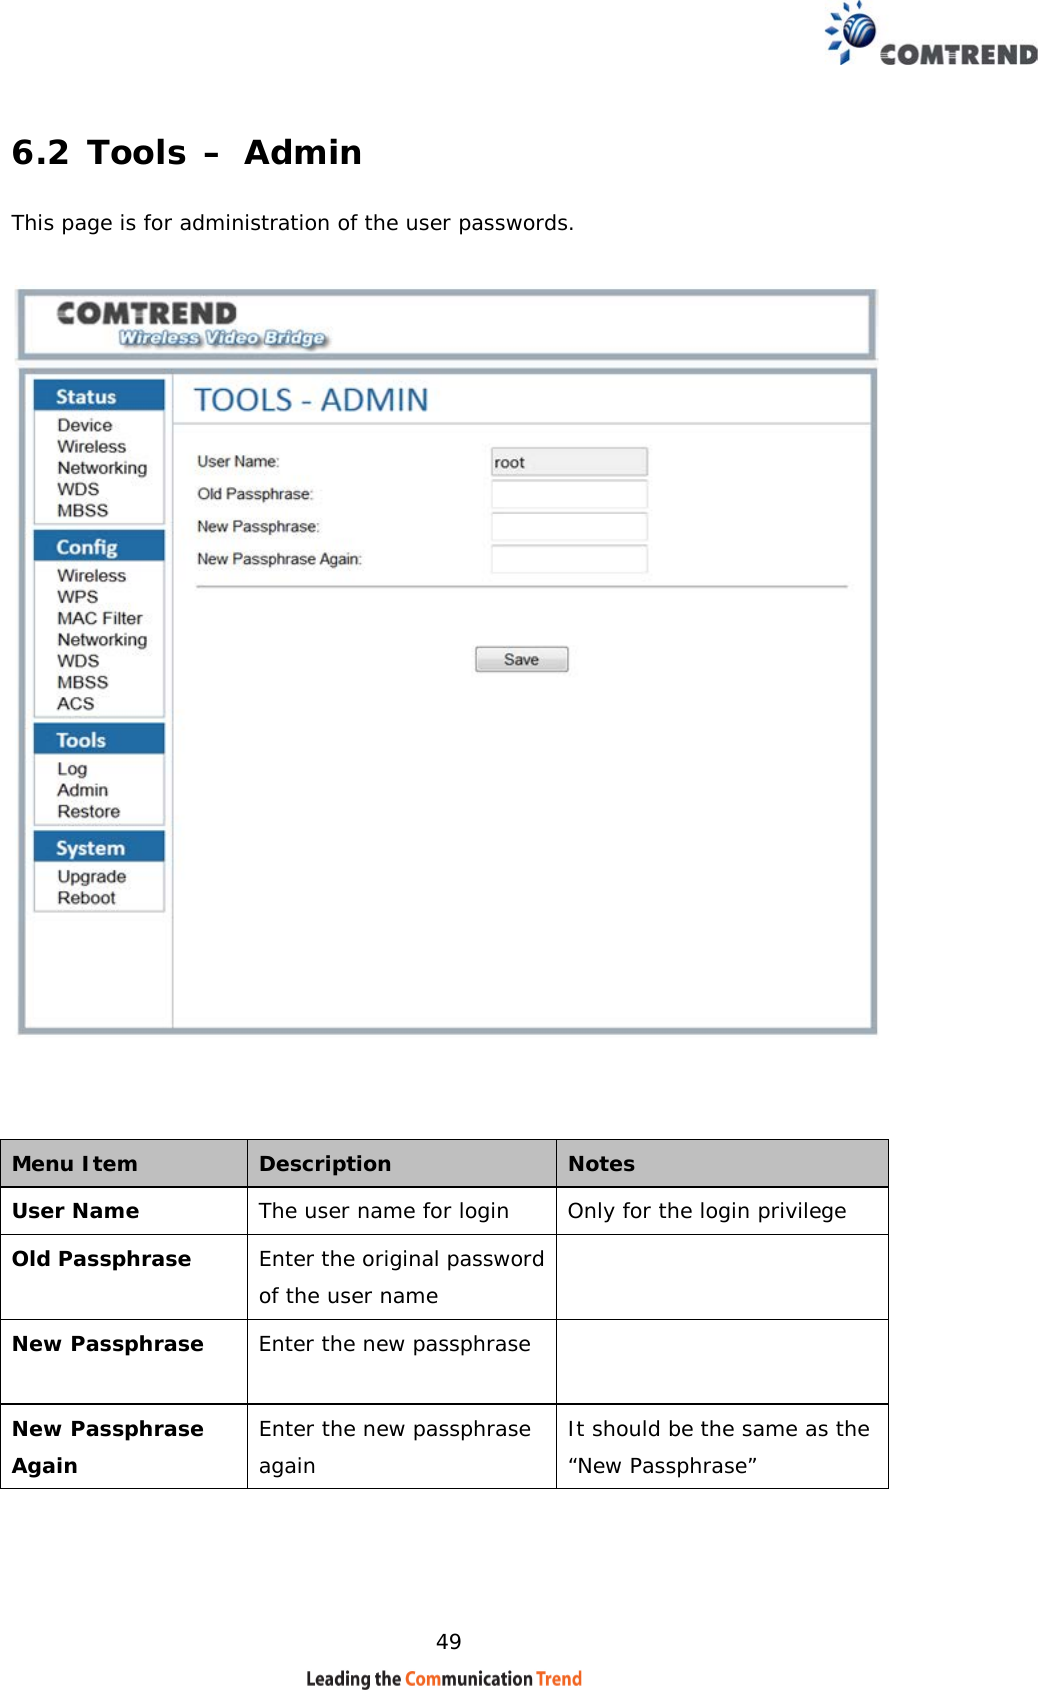    49 6.2 Tools – Admin This page is for administration of the user passwords.       Menu Item  Description  Notes  User Name  The user name for login Only for the login privilege  Old Passphrase  Enter the original password of the user name  New Passphrase  Enter the new passphrase    New Passphrase Again  Enter the new passphrase again It should be the same as the “New Passphrase” 